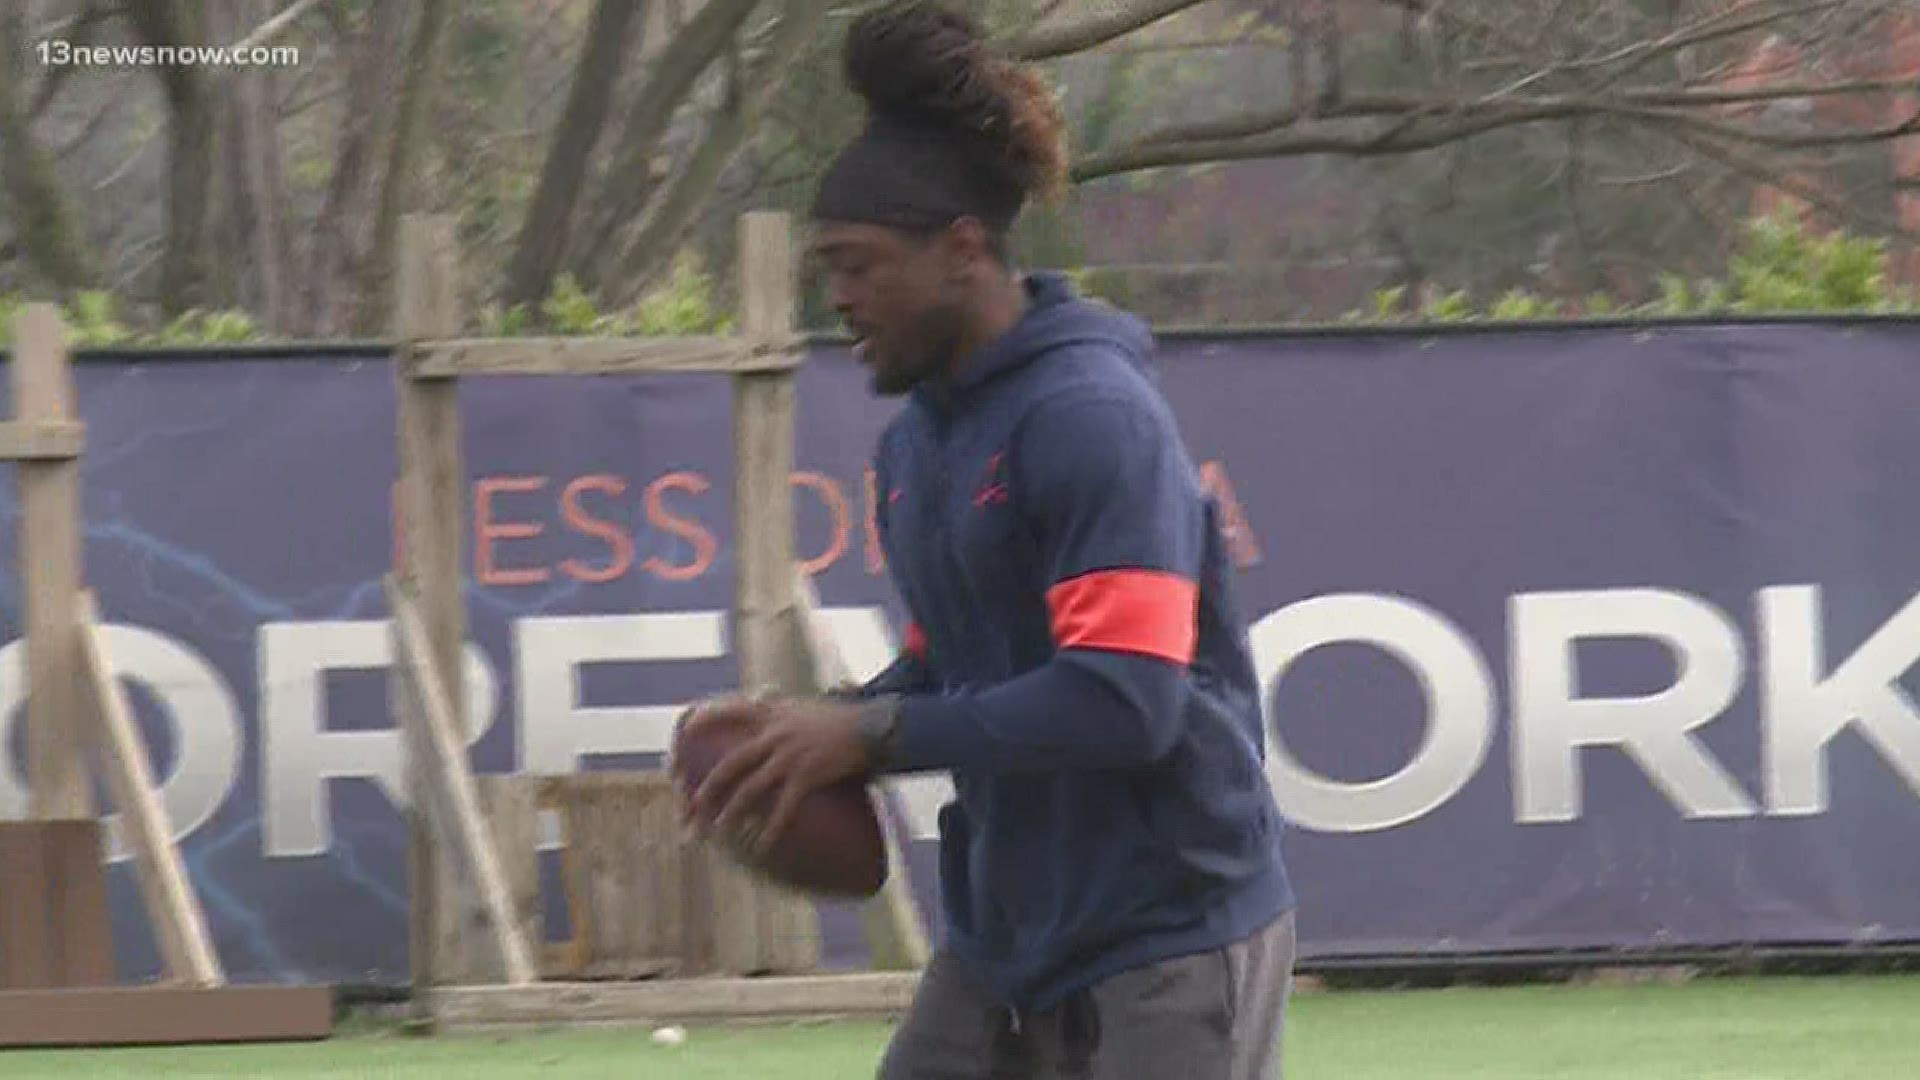 He might be considered a long shot to be drafted, but the UVA quarterback is still upbeat.